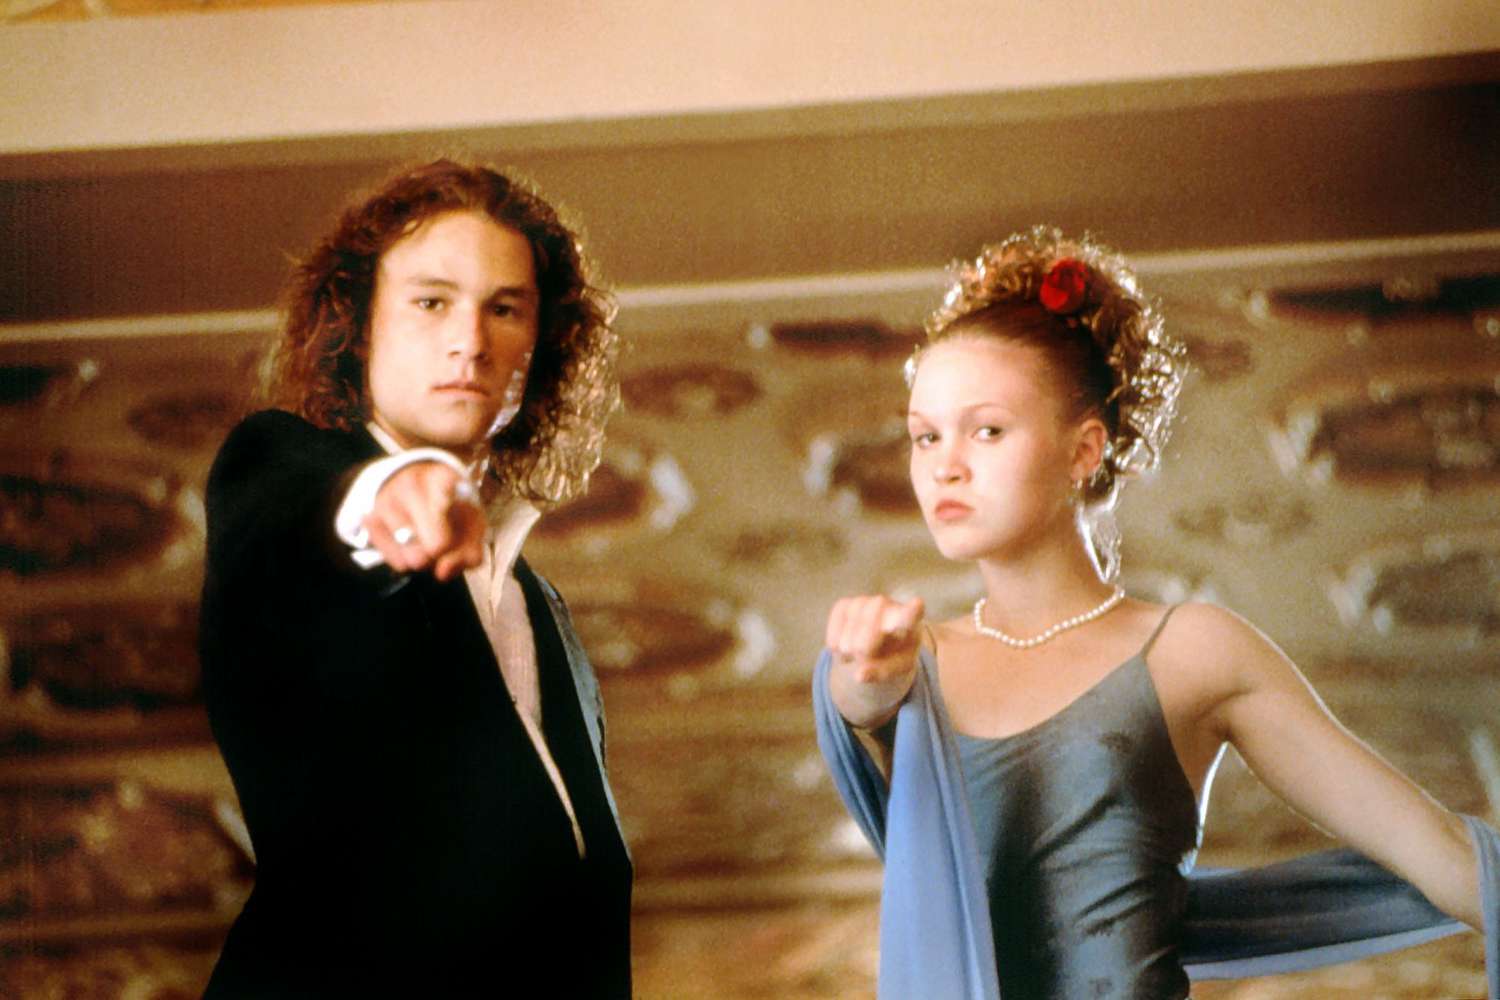 10 THINGS I HATE ABOUT YOU, (aka TEN THINGS I HATE ABOUT YOU), Heath Ledger, Julia Stiles, 1999